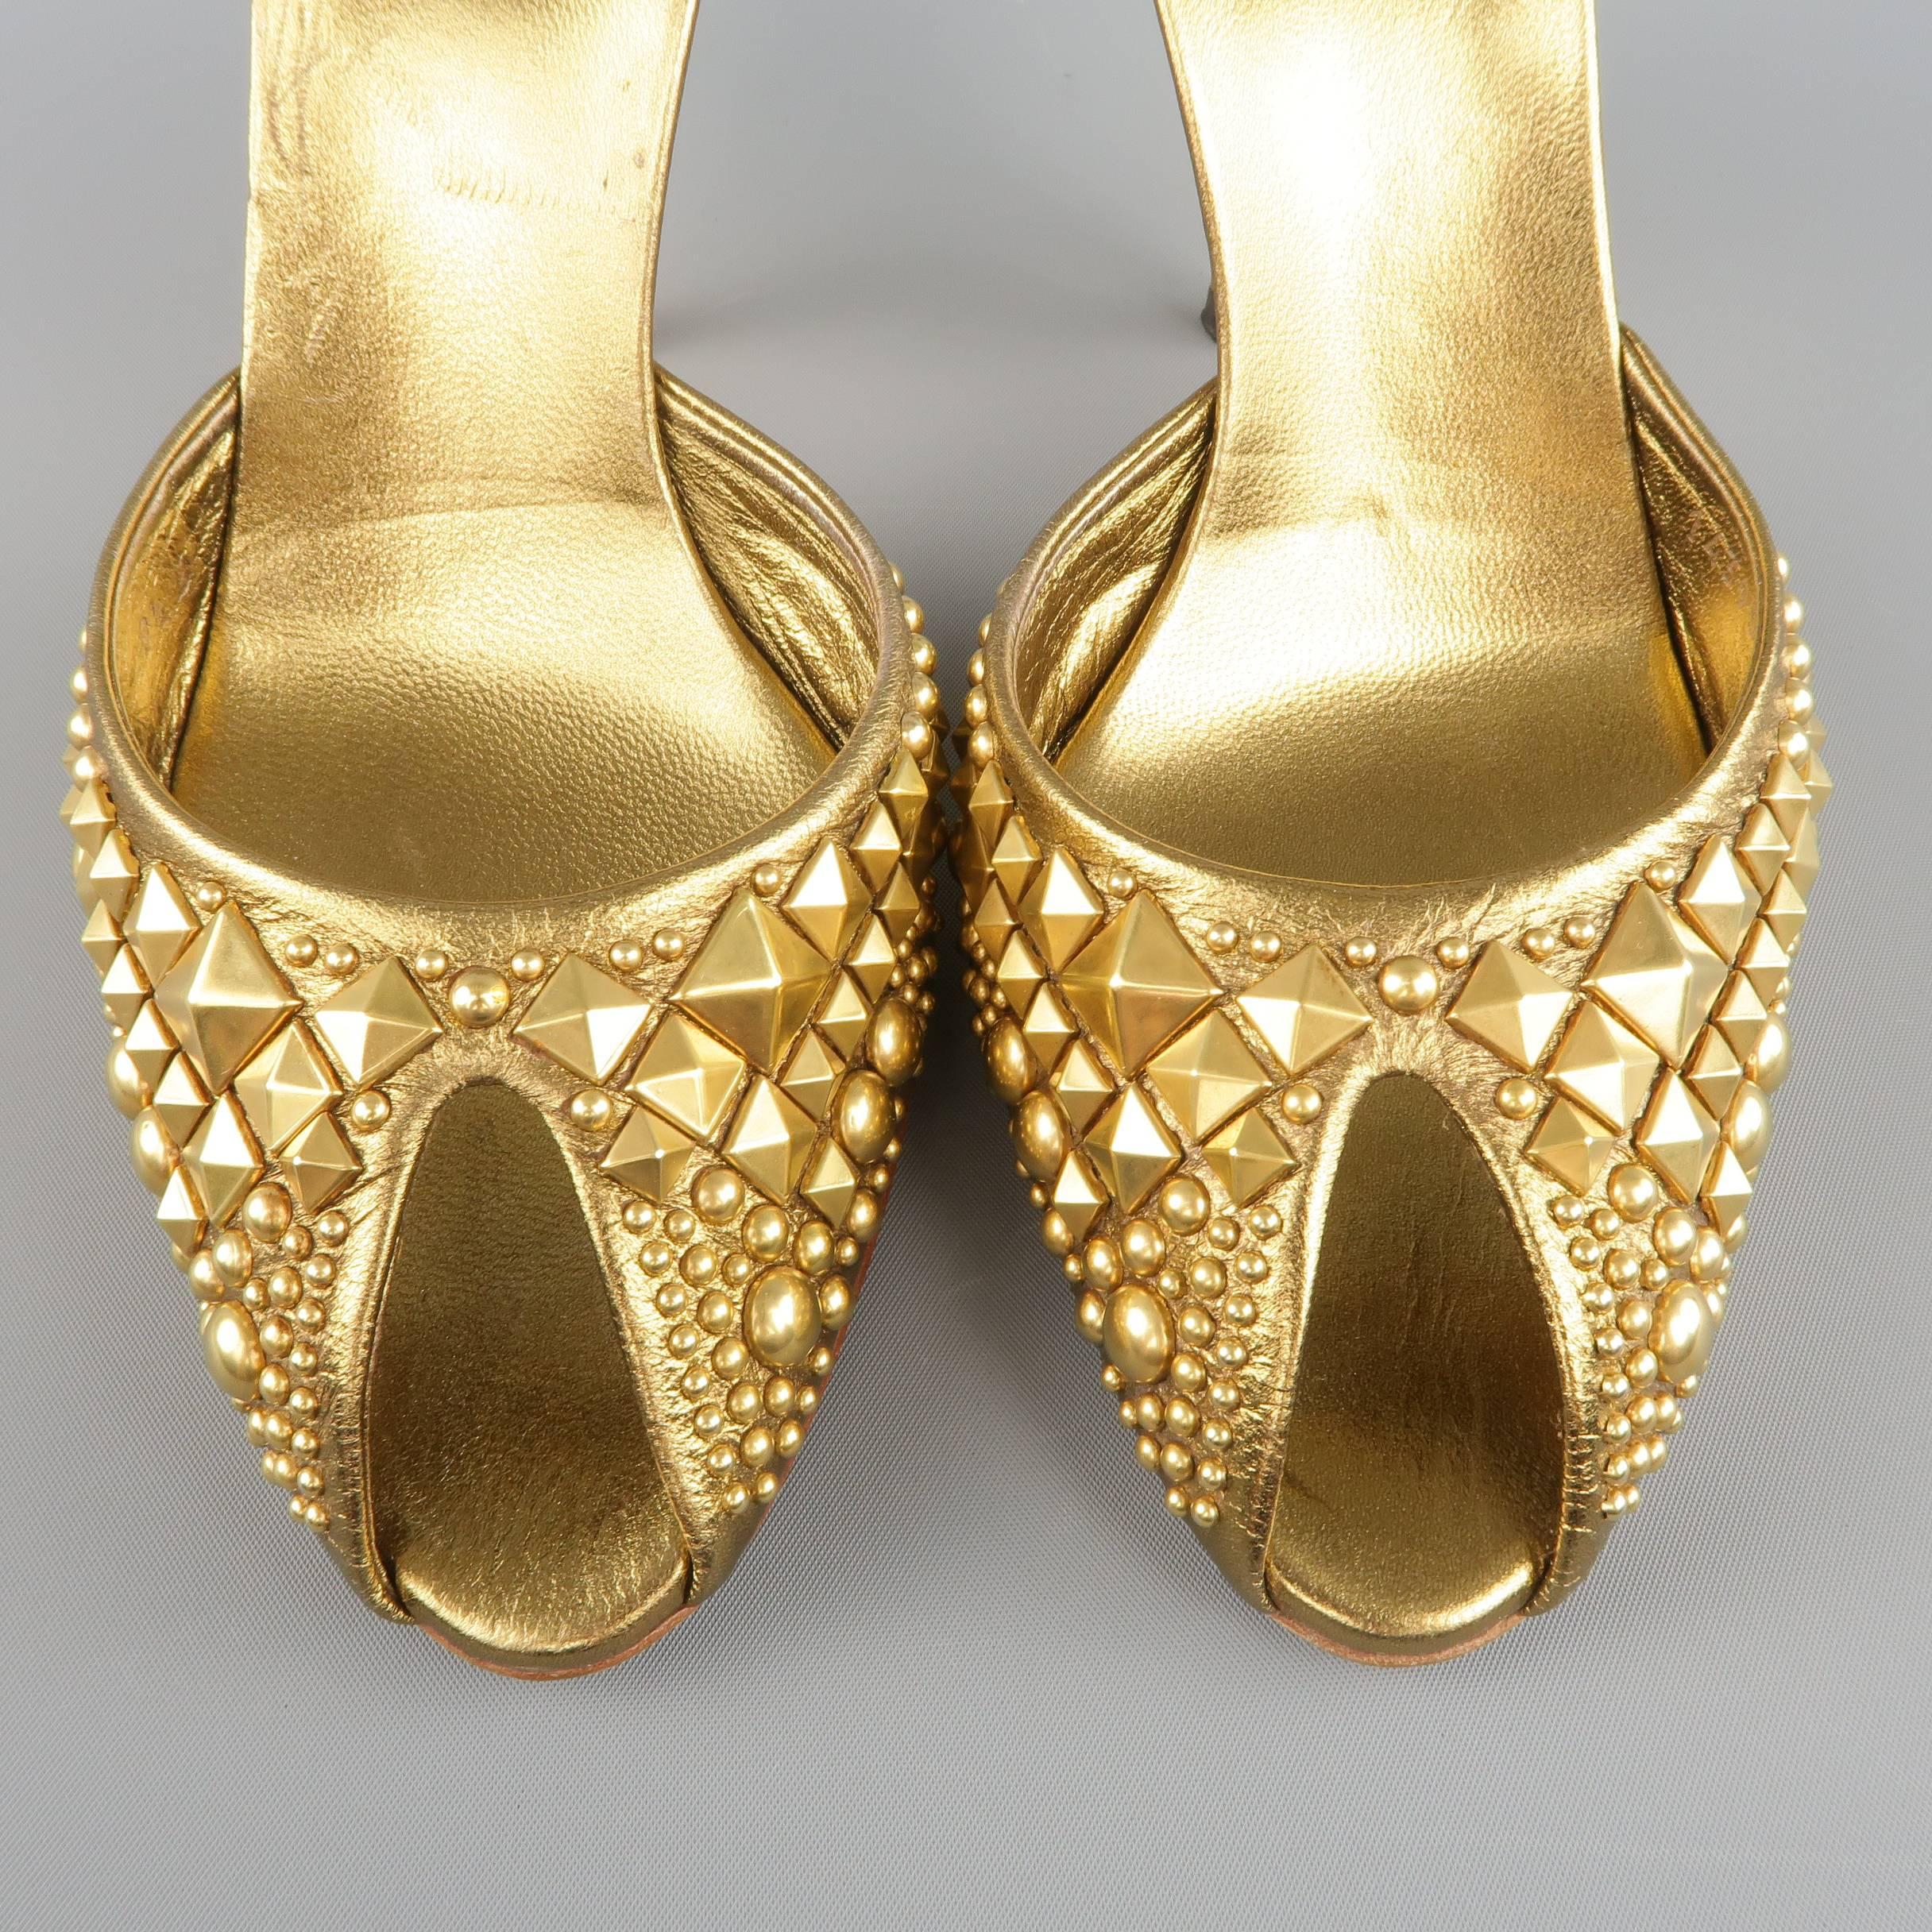 These fabulous GUCCI mules come in metallic gold leather and features a slit peep toe with all over pyramid and dome stud embellishments and chunky studded stiletto heel. Made in Italy.
 
Excellent Pre-Owned Condition.
Marked: 9.5 B
 
Heel: 4.75